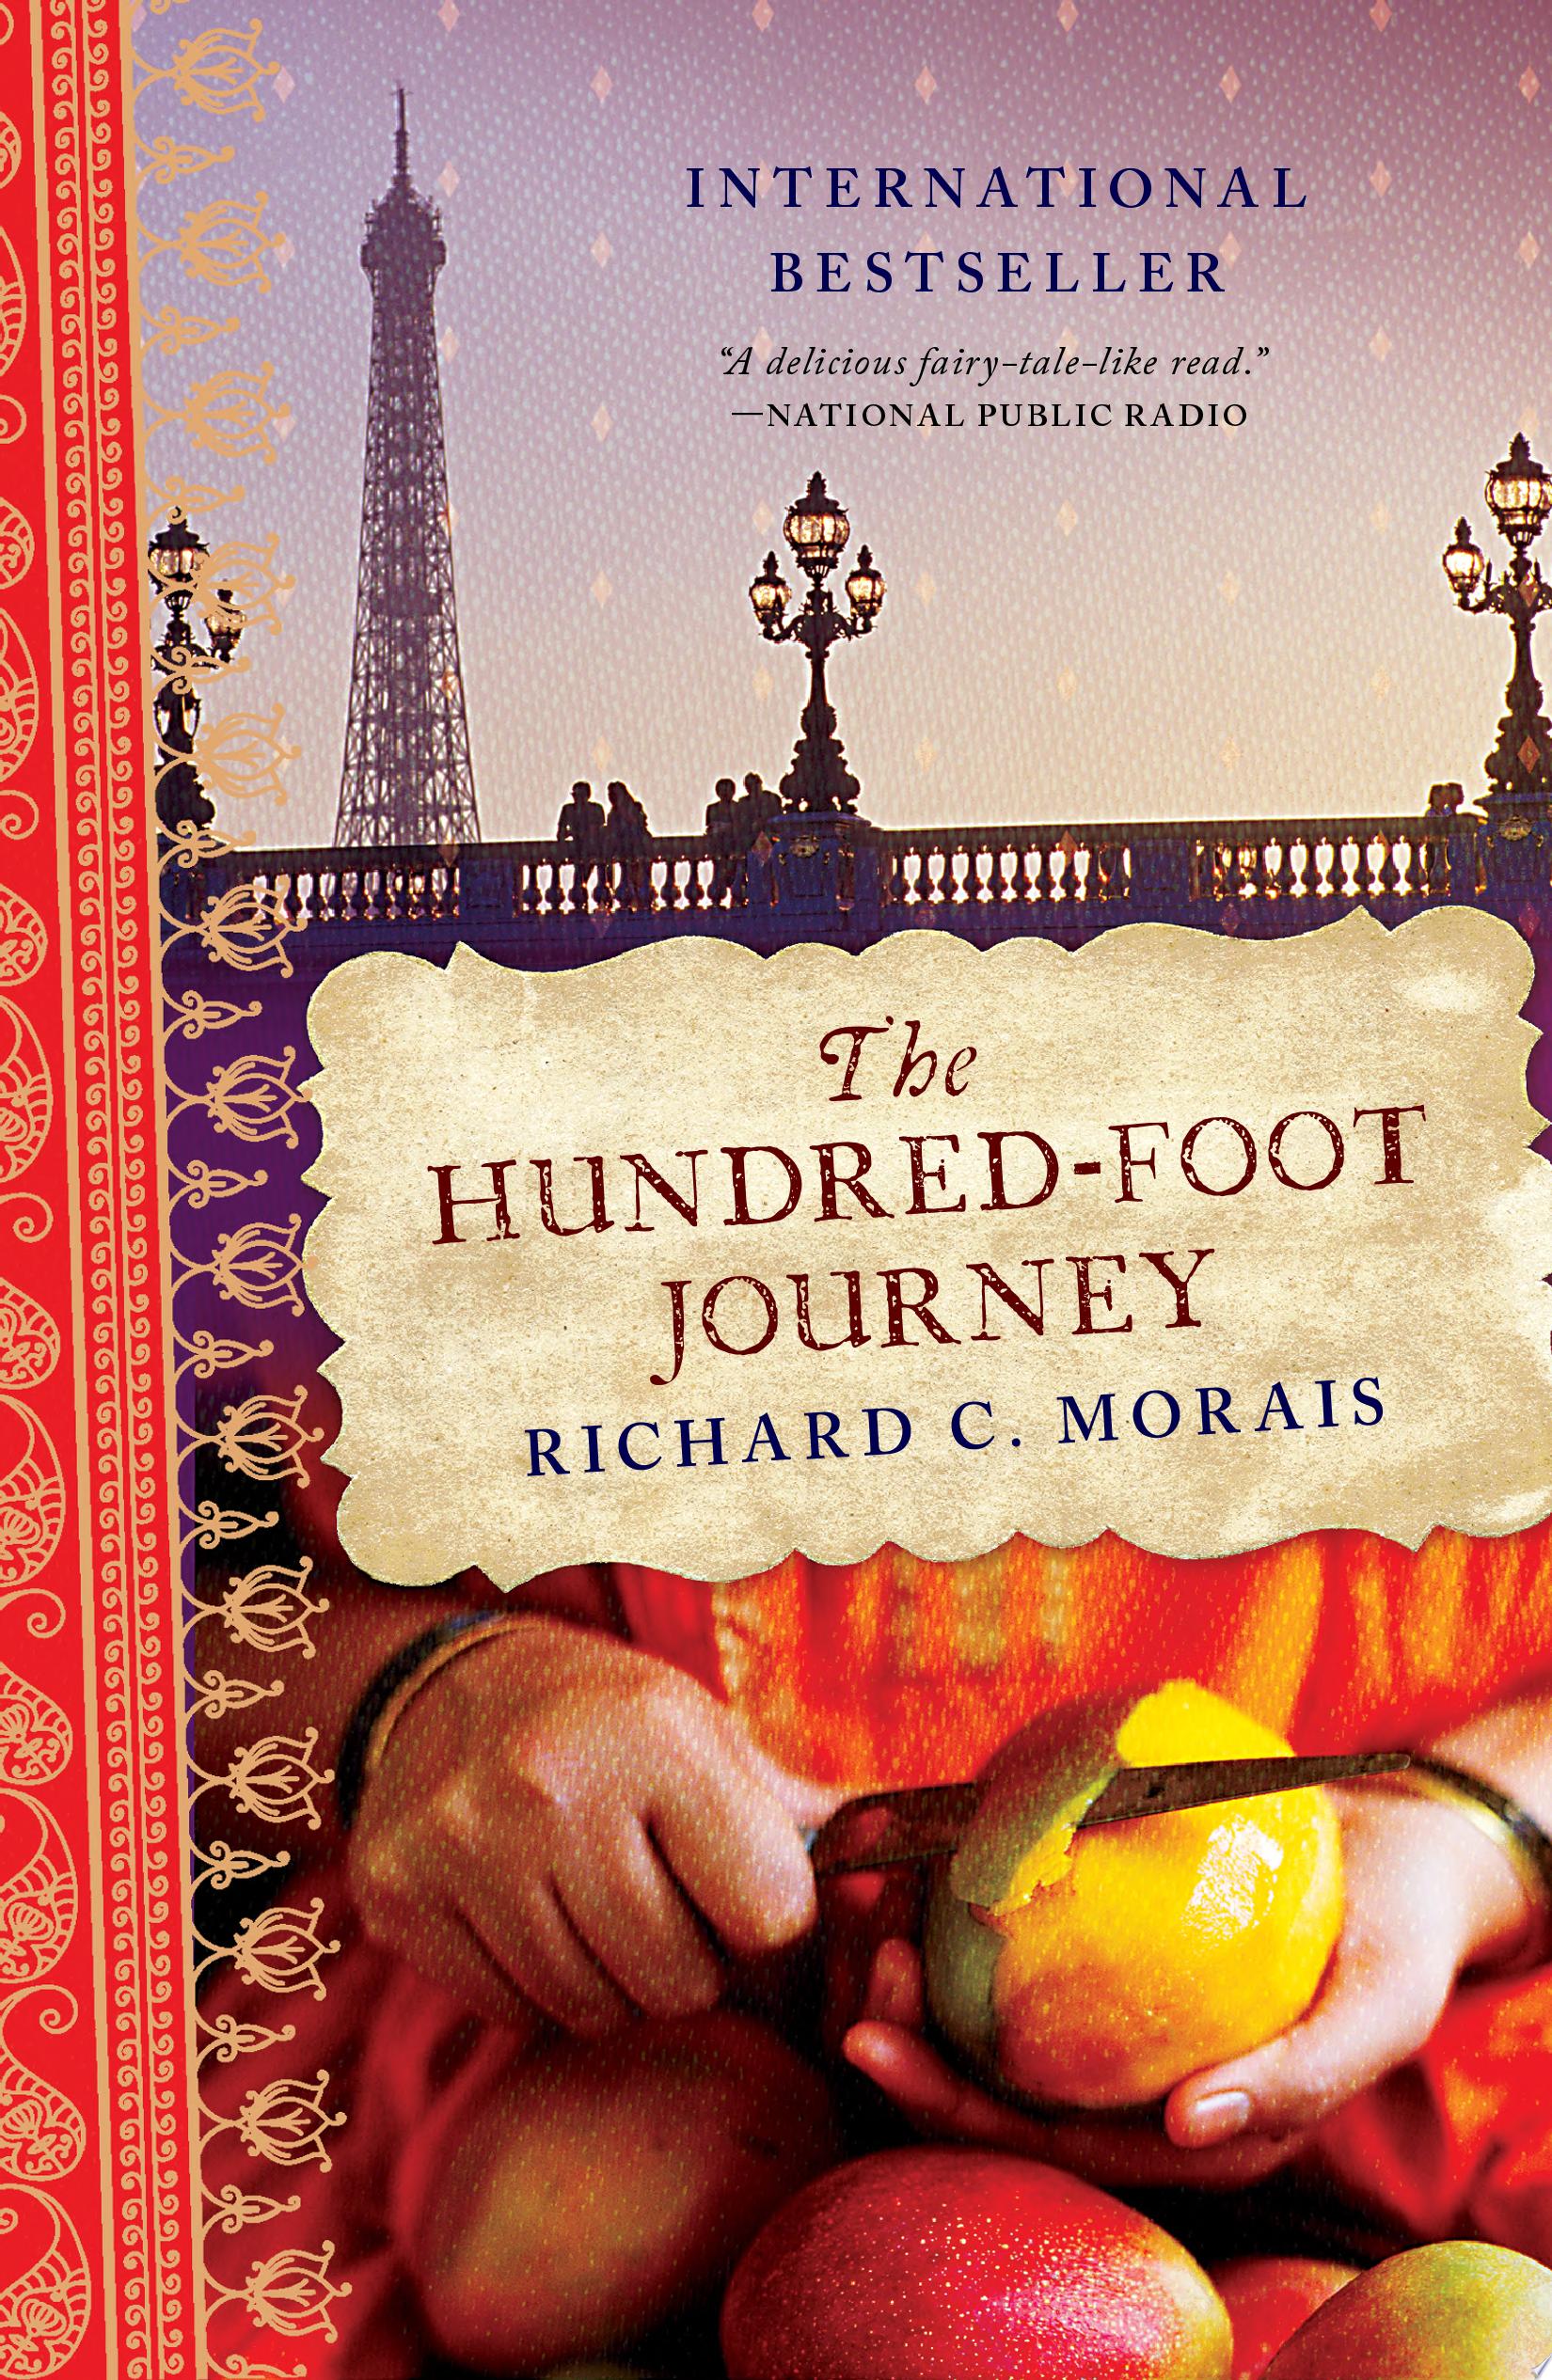 Image for "The Hundred-Foot Journey"